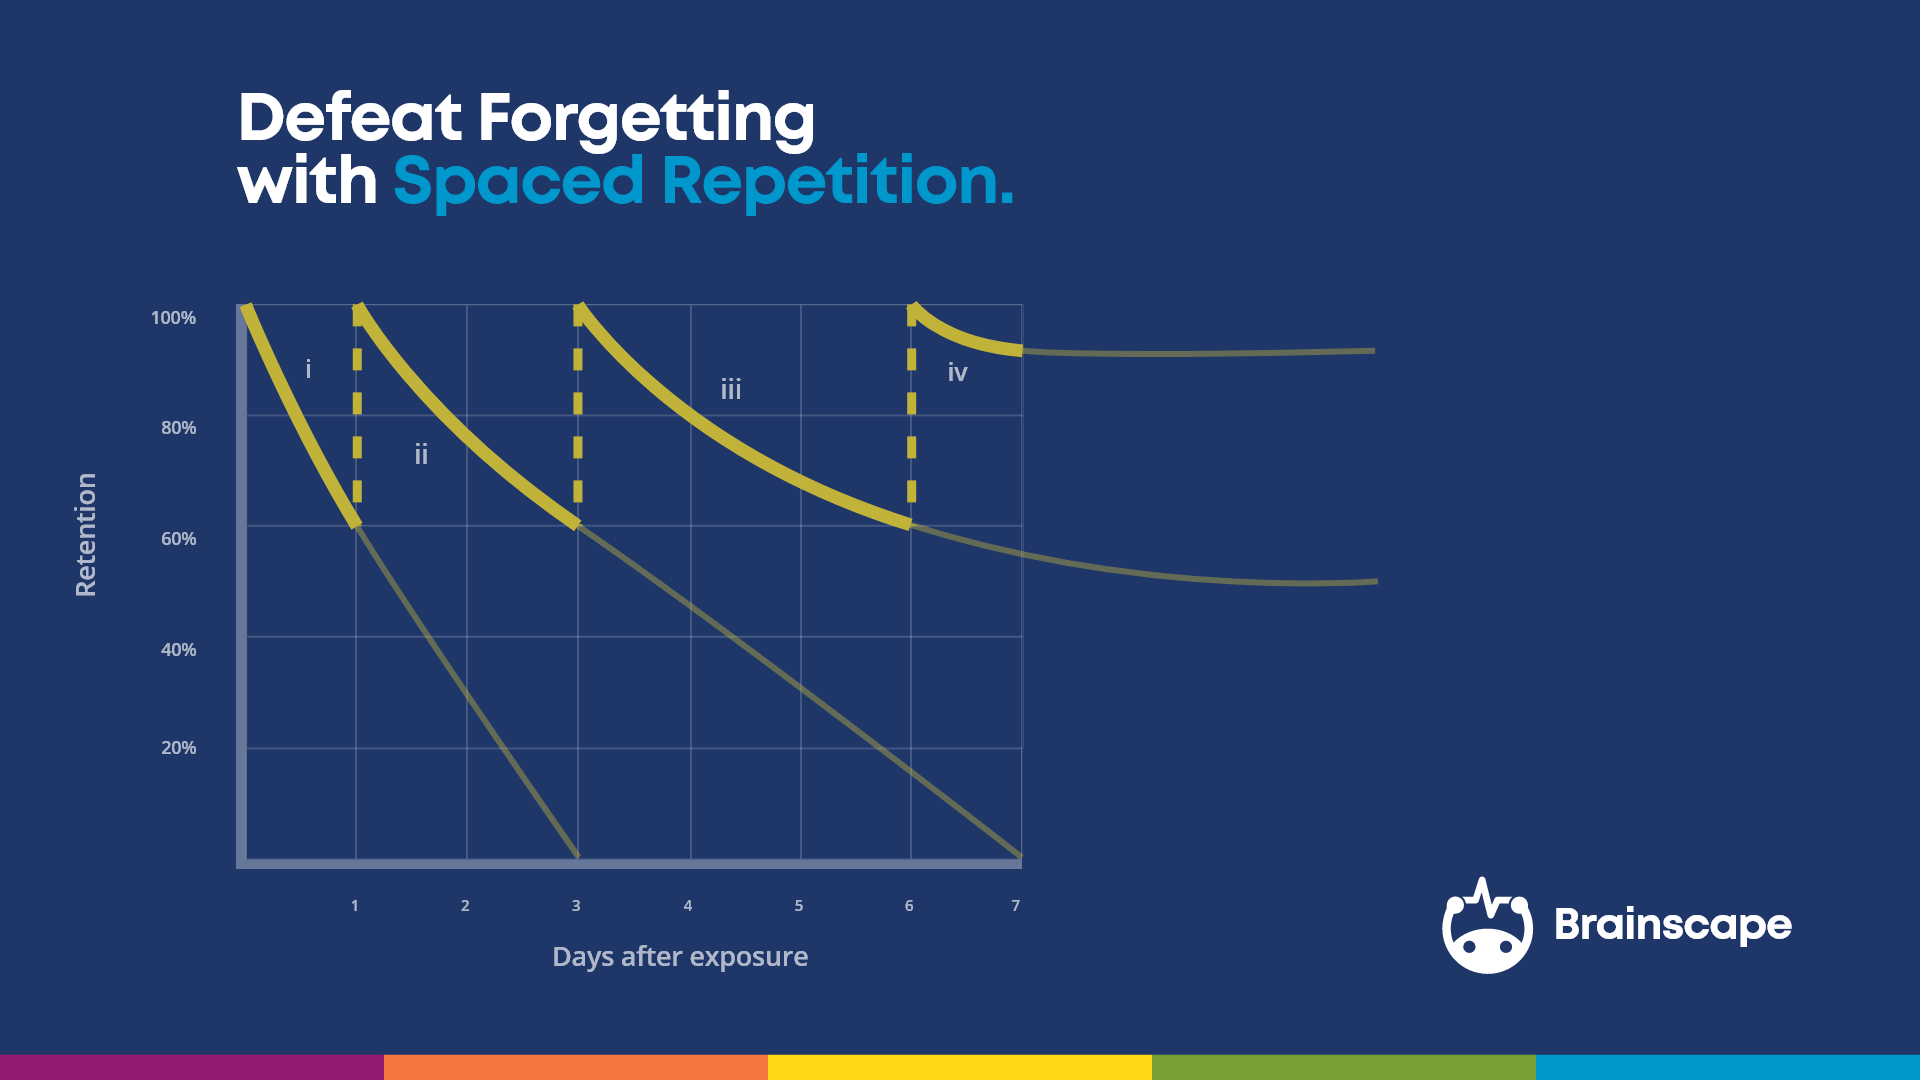 The forgetting curve shows how you need to practice something repeatedly through spaced repetition so that you can remember it forever